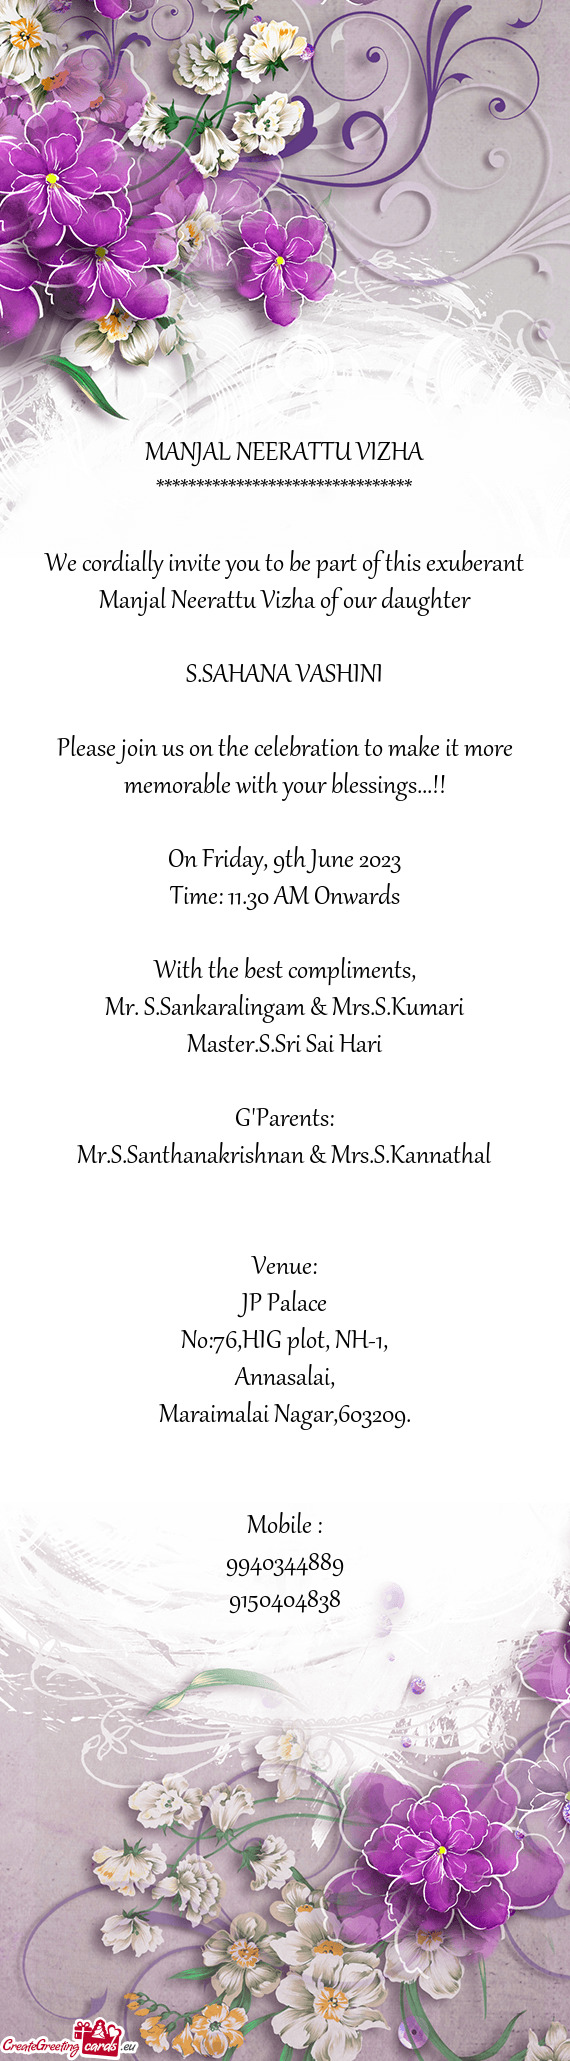 We cordially invite you to be part of this exuberant Manjal Neerattu Vizha of our daughter